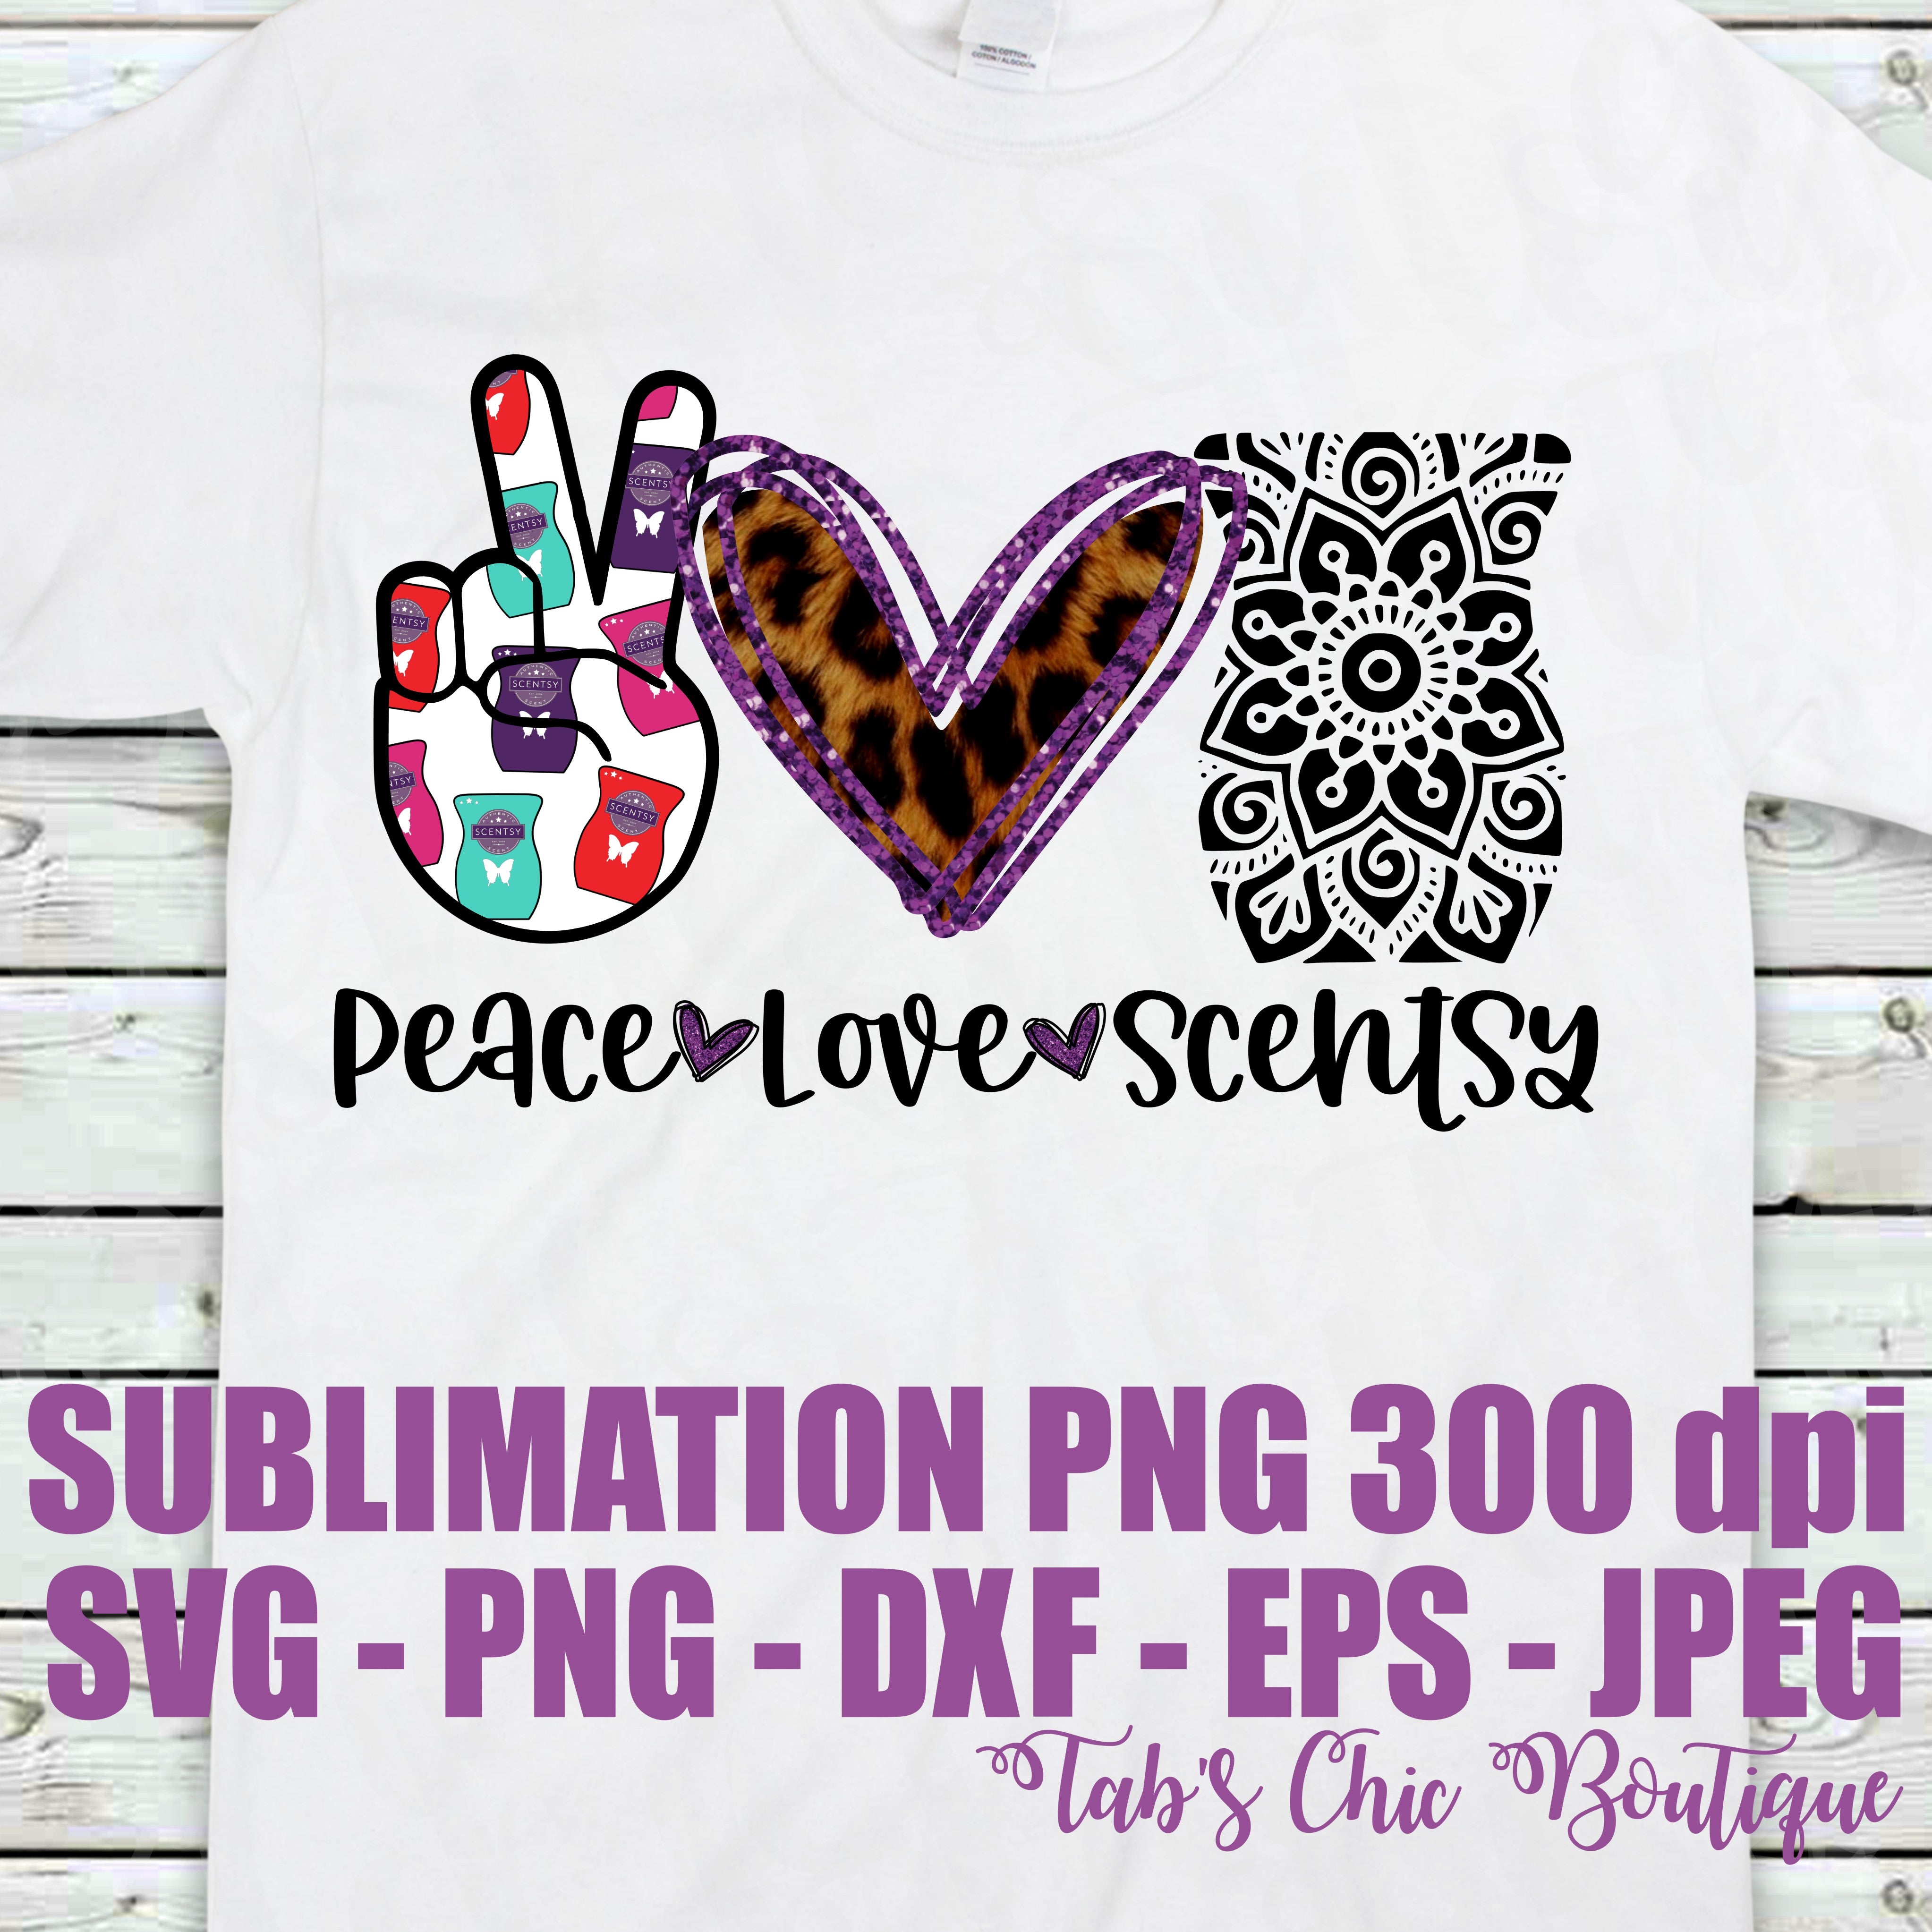 Download Peace Love Scentsy Svg Png Jpeg Dxf Eps 300dpi Sublimation Design Cutt Tab S Chic Boutique